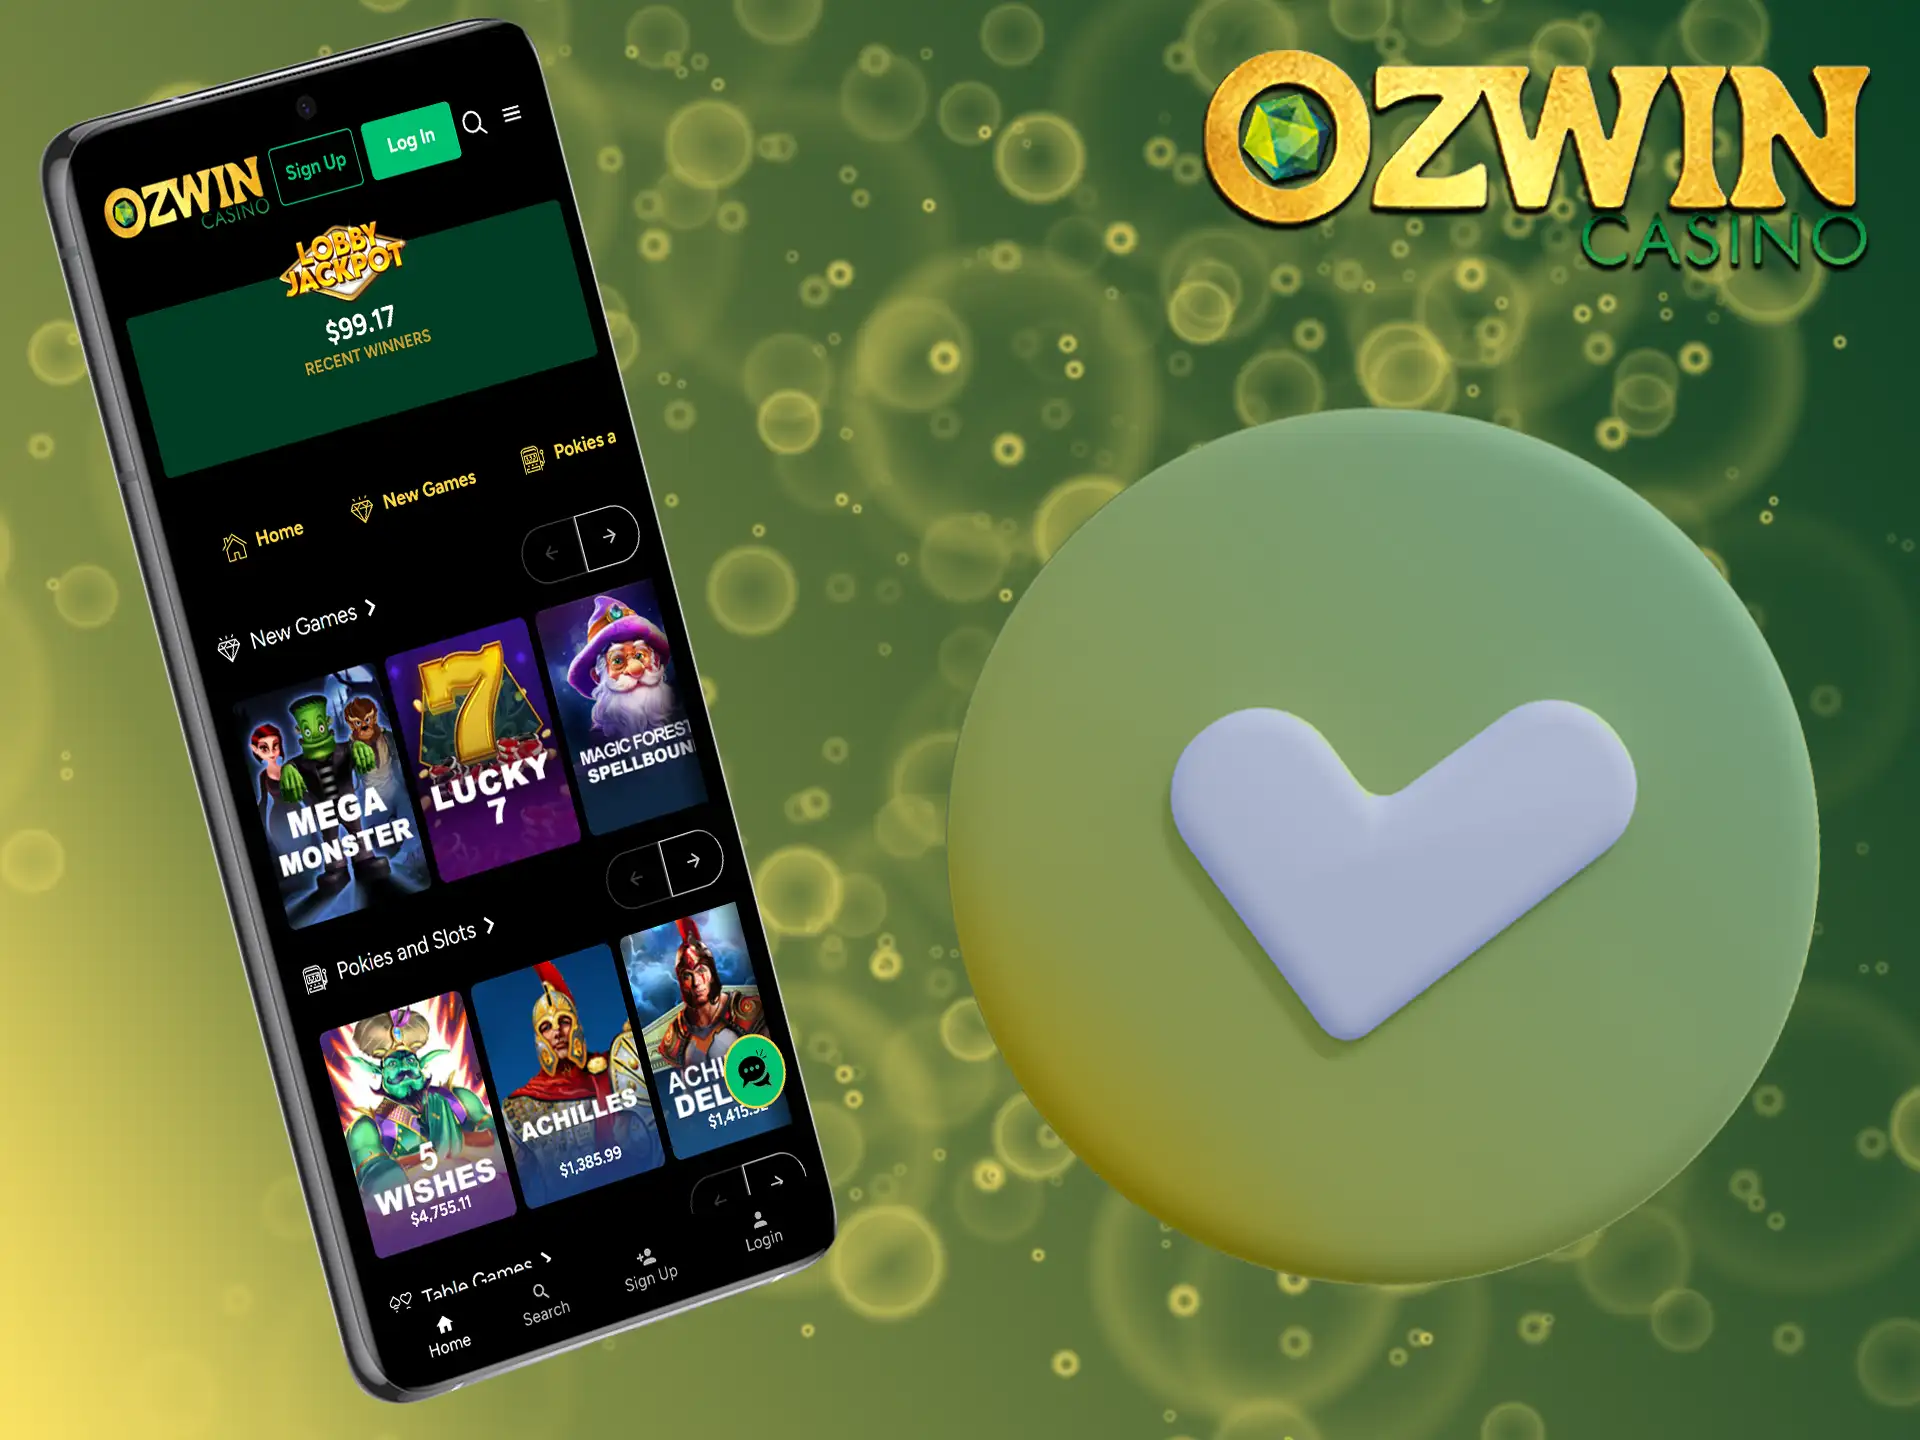 Here's a look at the benefits of choosing the mobile web version of Ozwin.